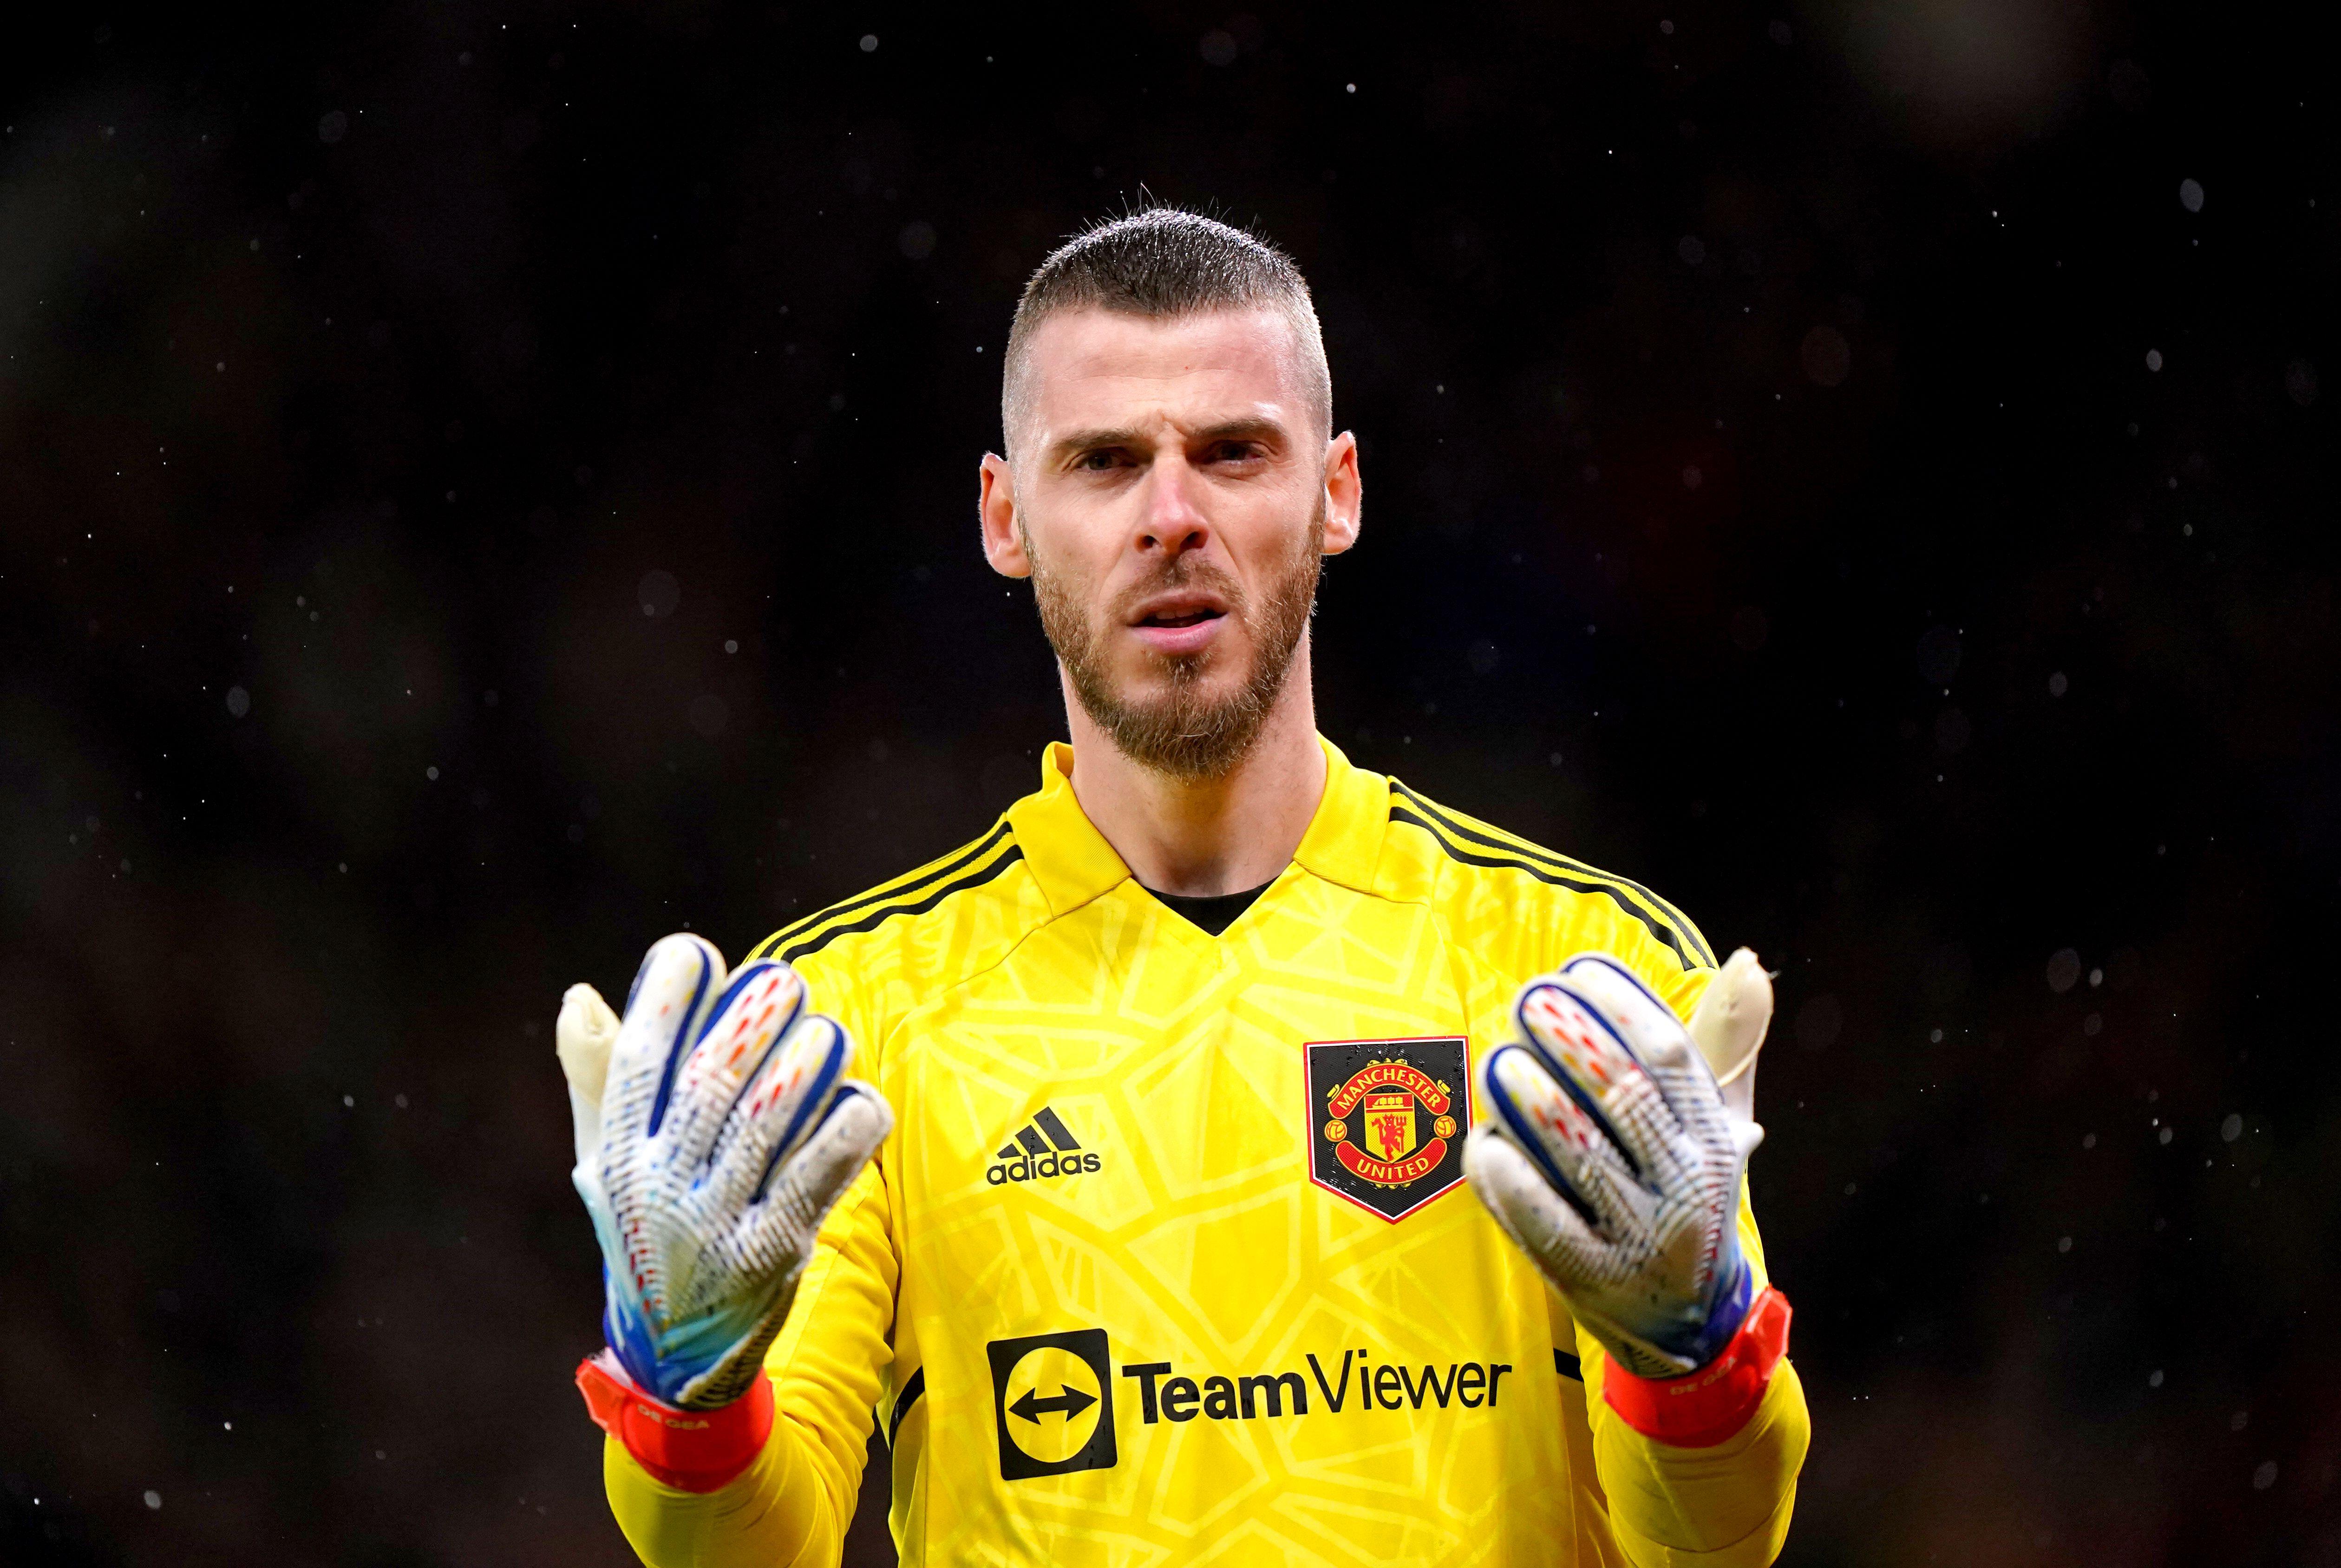 Exclusive: Man United have made contact with a second goalkeeper